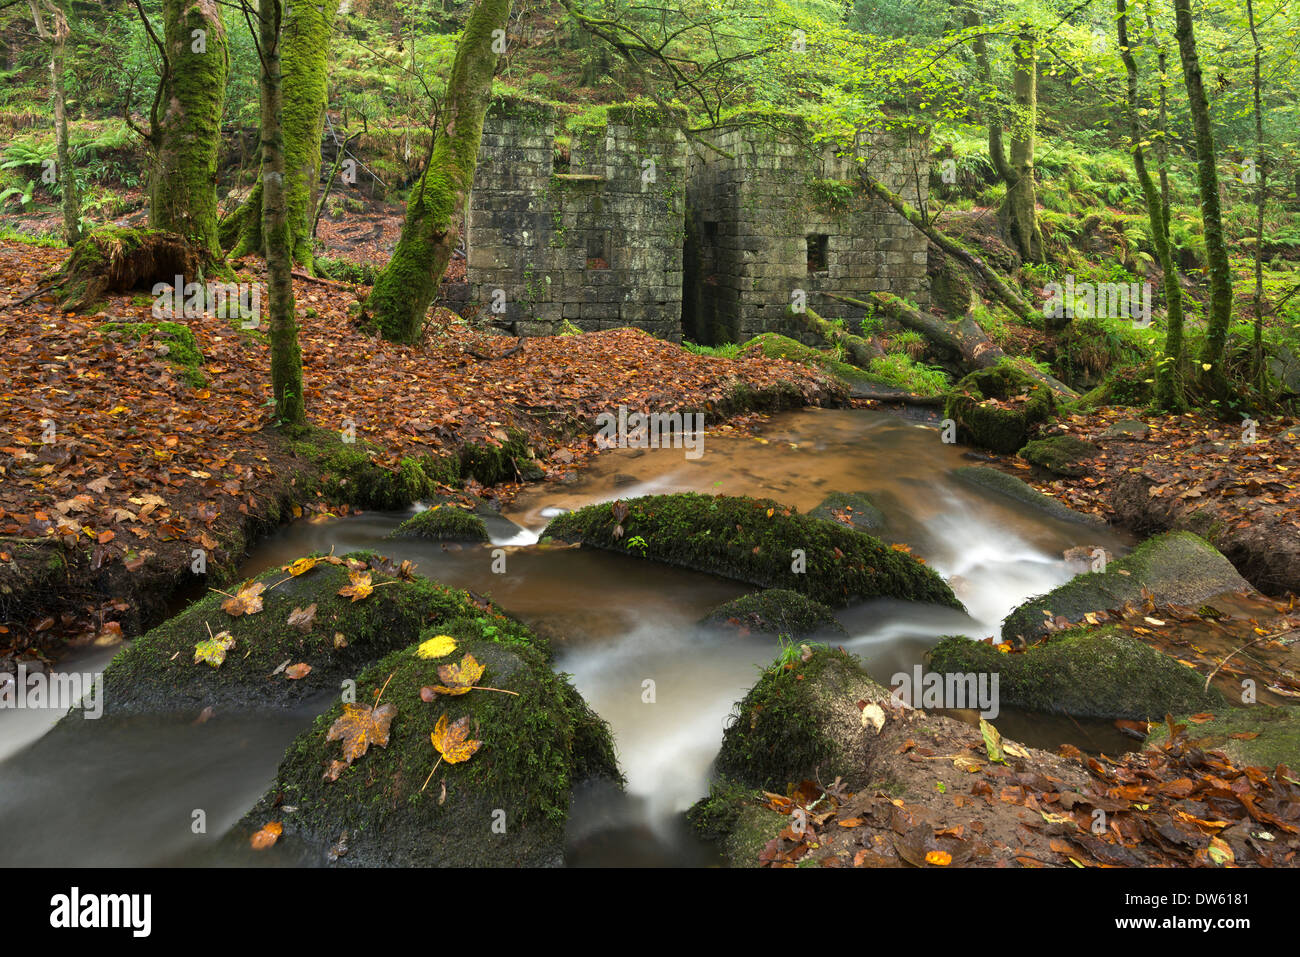 Remains of gunpowder mills at Kennall Vale Nature Reserve in Ponsanooth near Falmouth, Cornwall, England. Autumn (October) 2013. Stock Photo